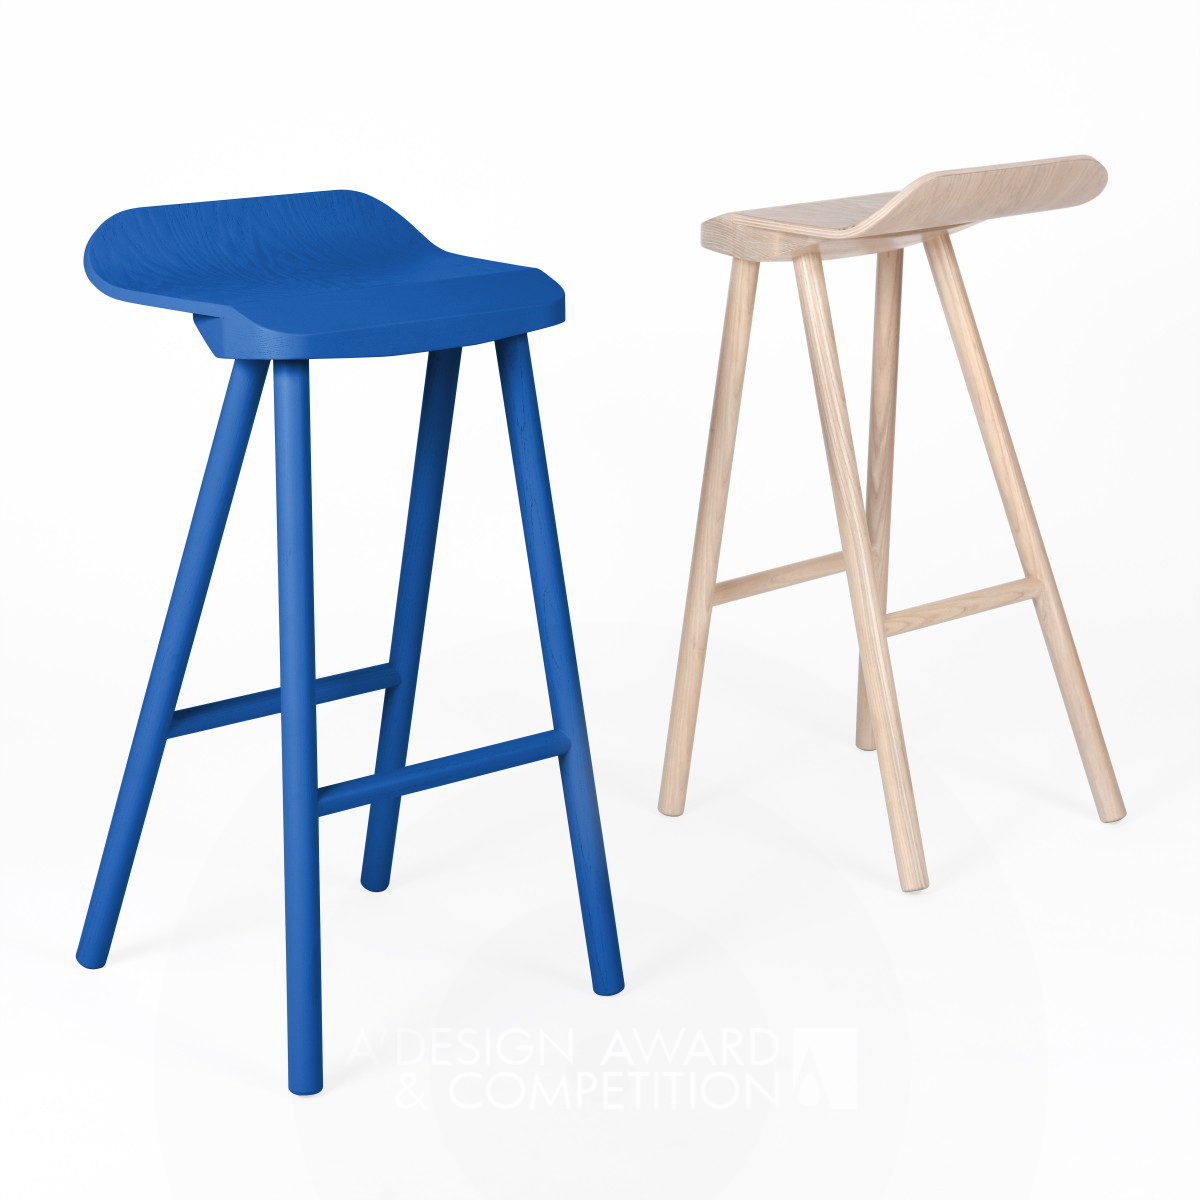 Spring stool Stool by Andrew Cheng